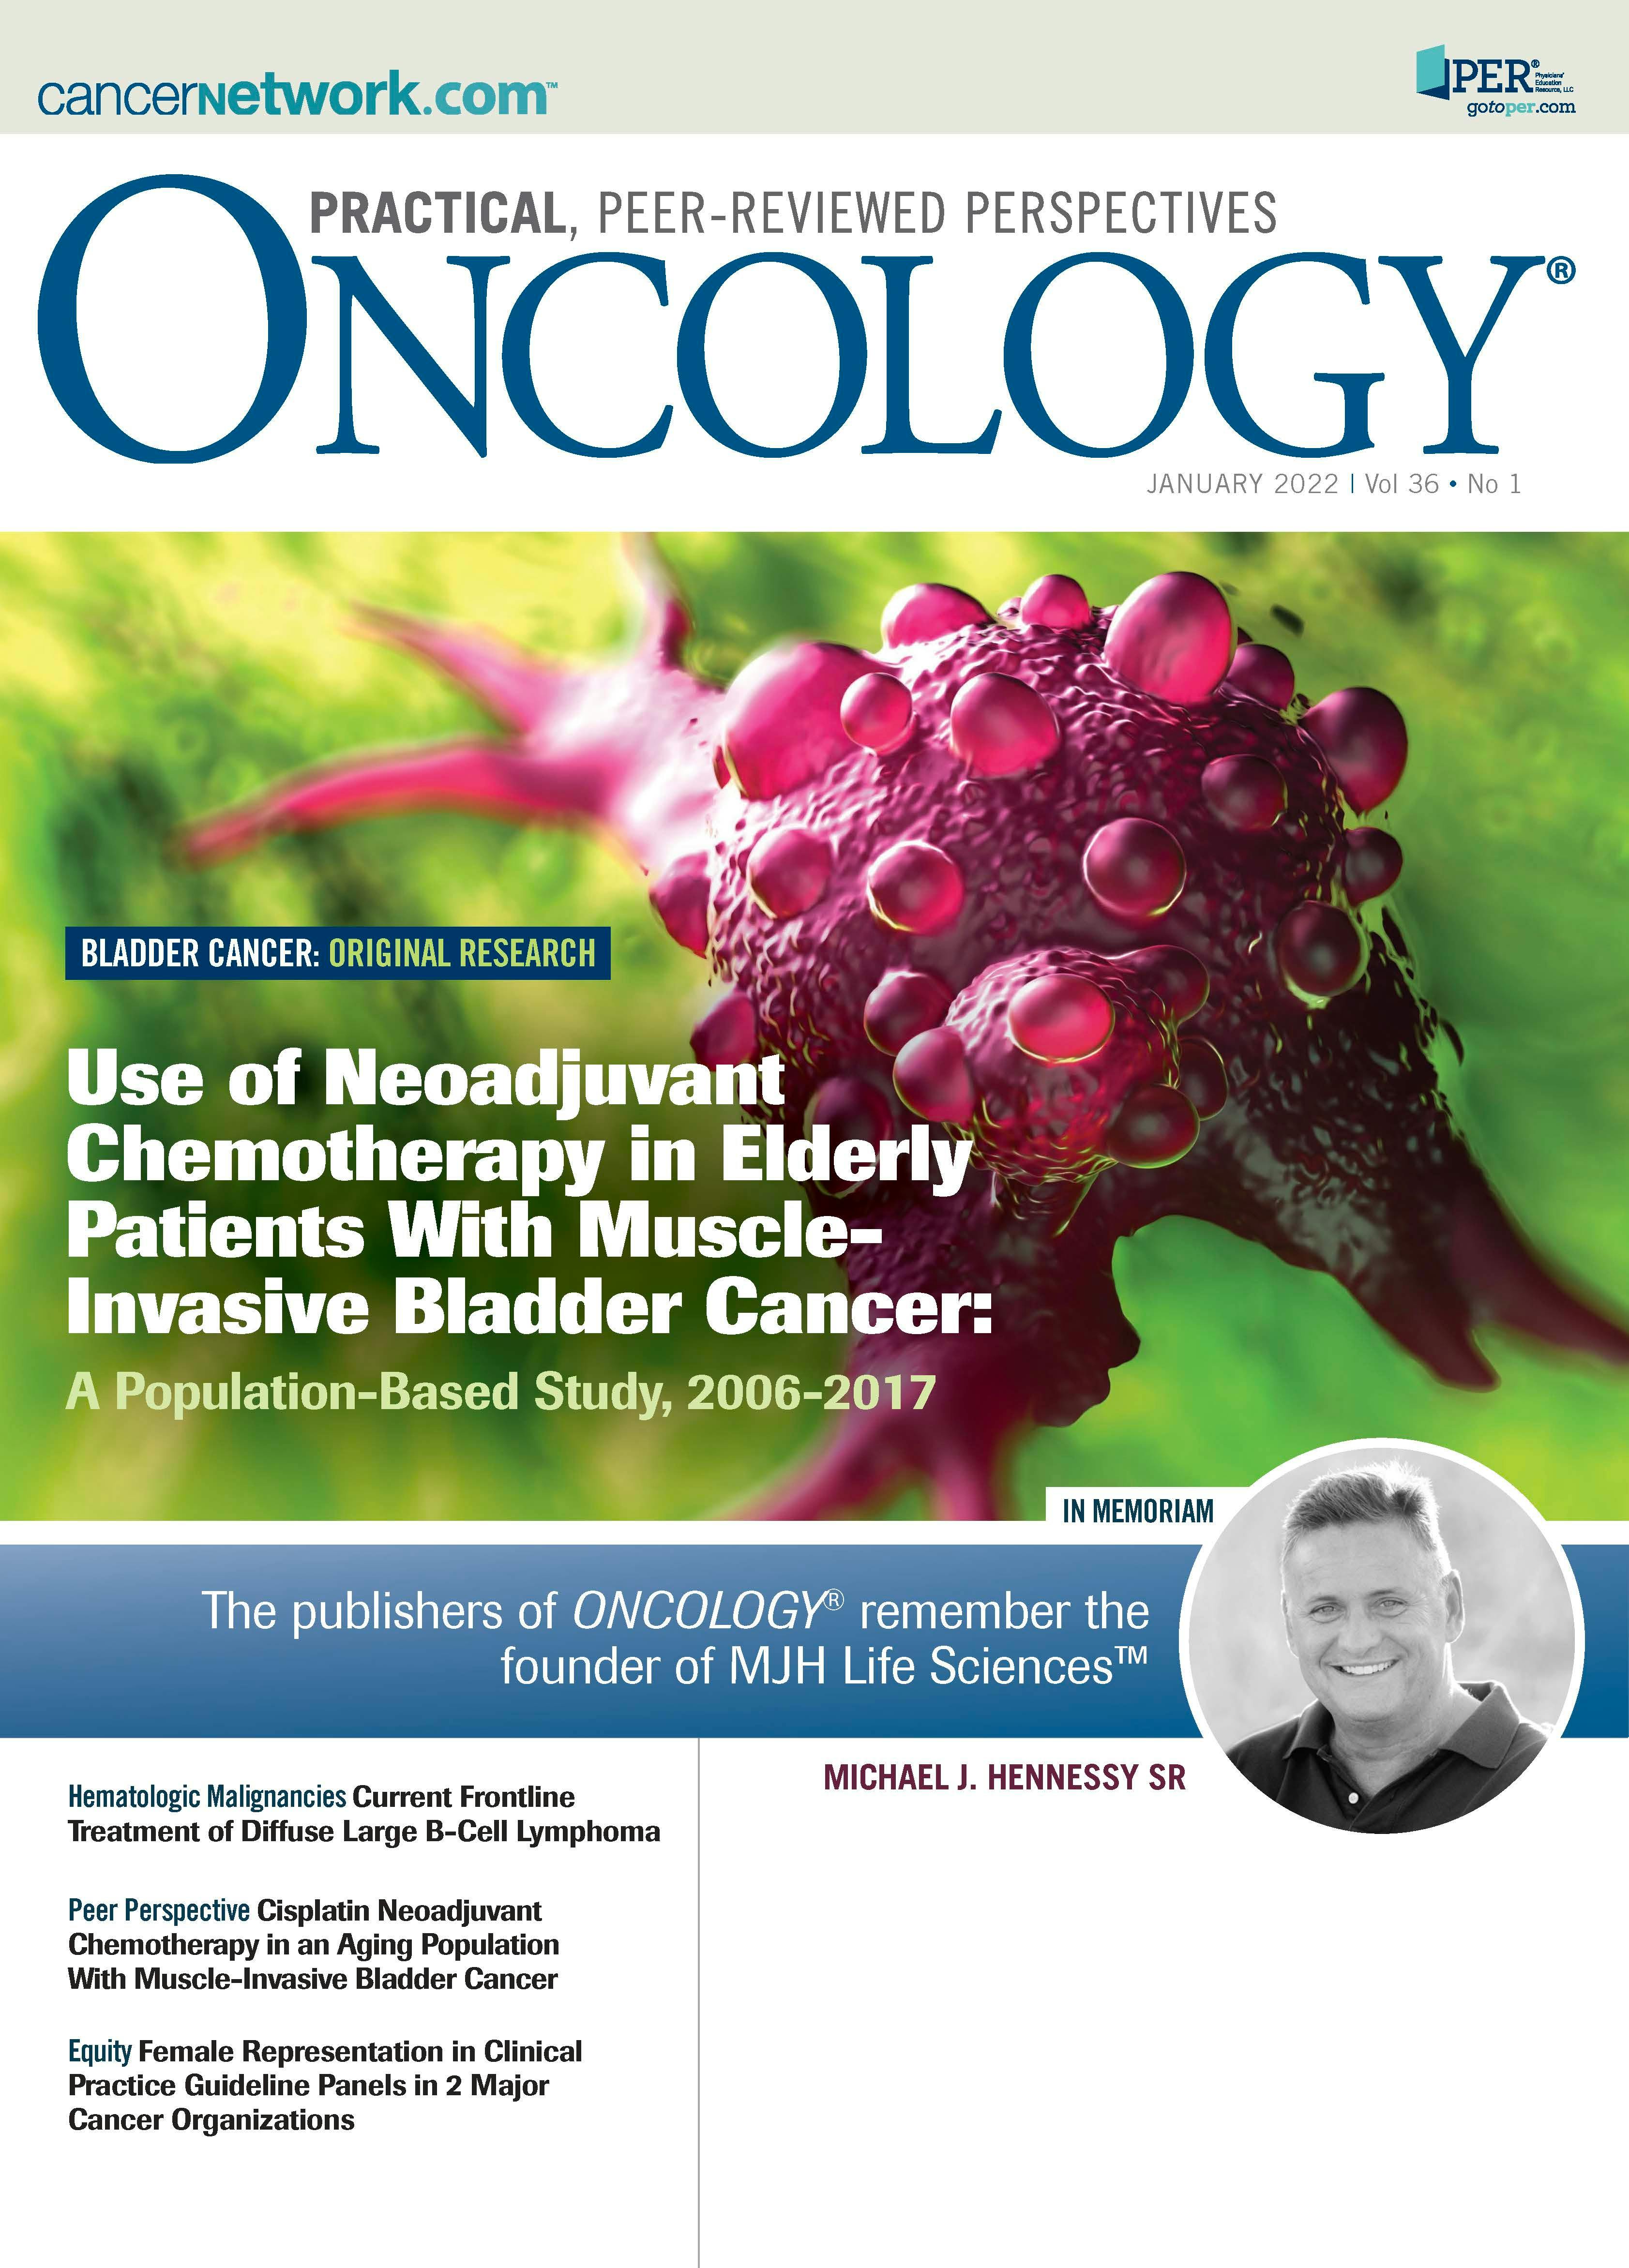 ONCOLOGY Vol 36, Issue 1